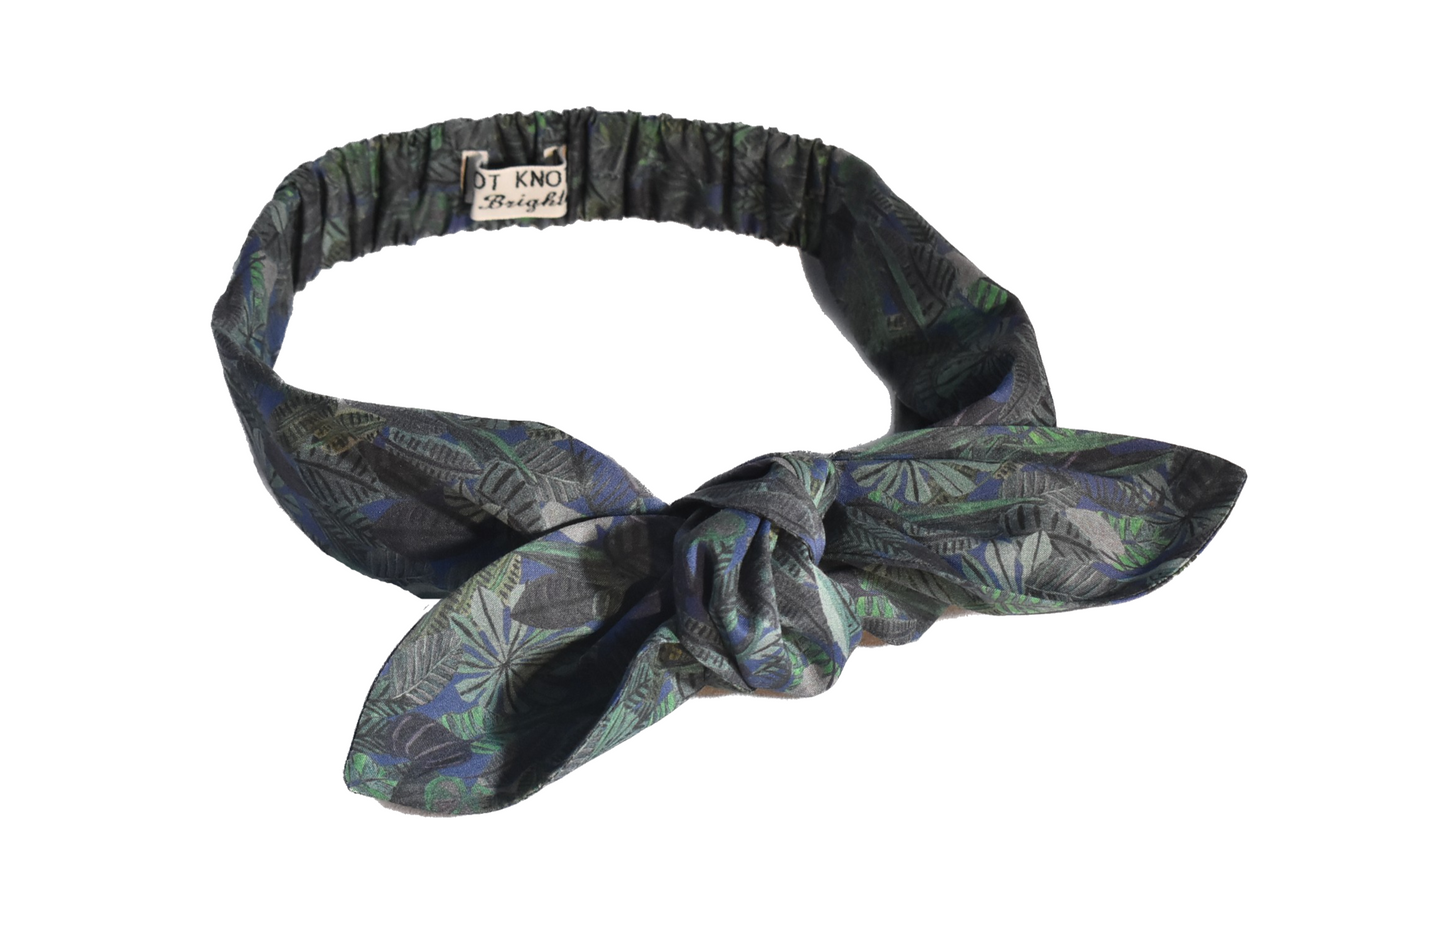 Kids Tot Knot Twisted hairband - Liberty of London Chaparrel - Navy and Green Fern Print